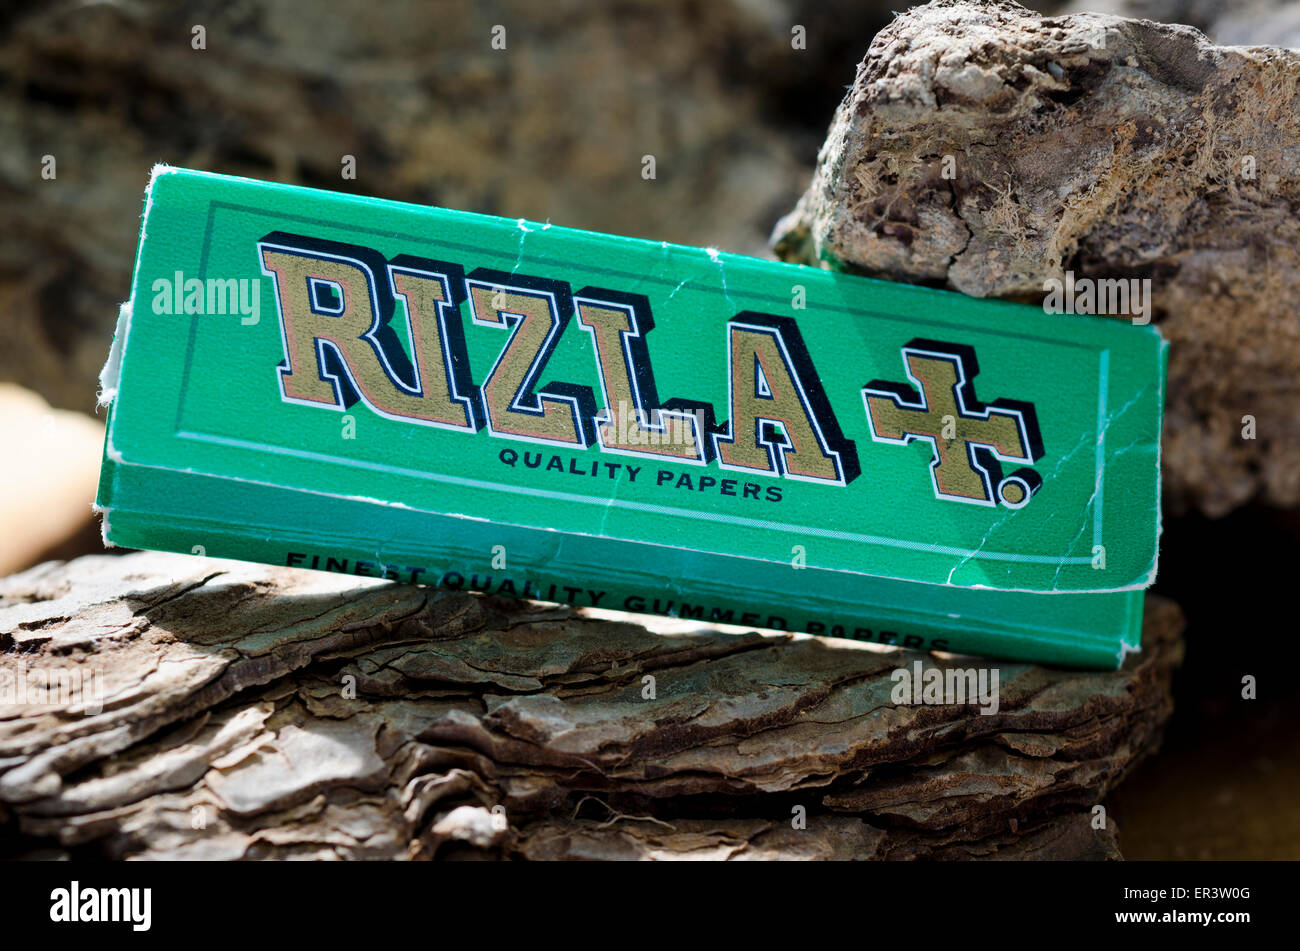 Packet Rizla Green Cigarette Rolling Papers Stock Photo